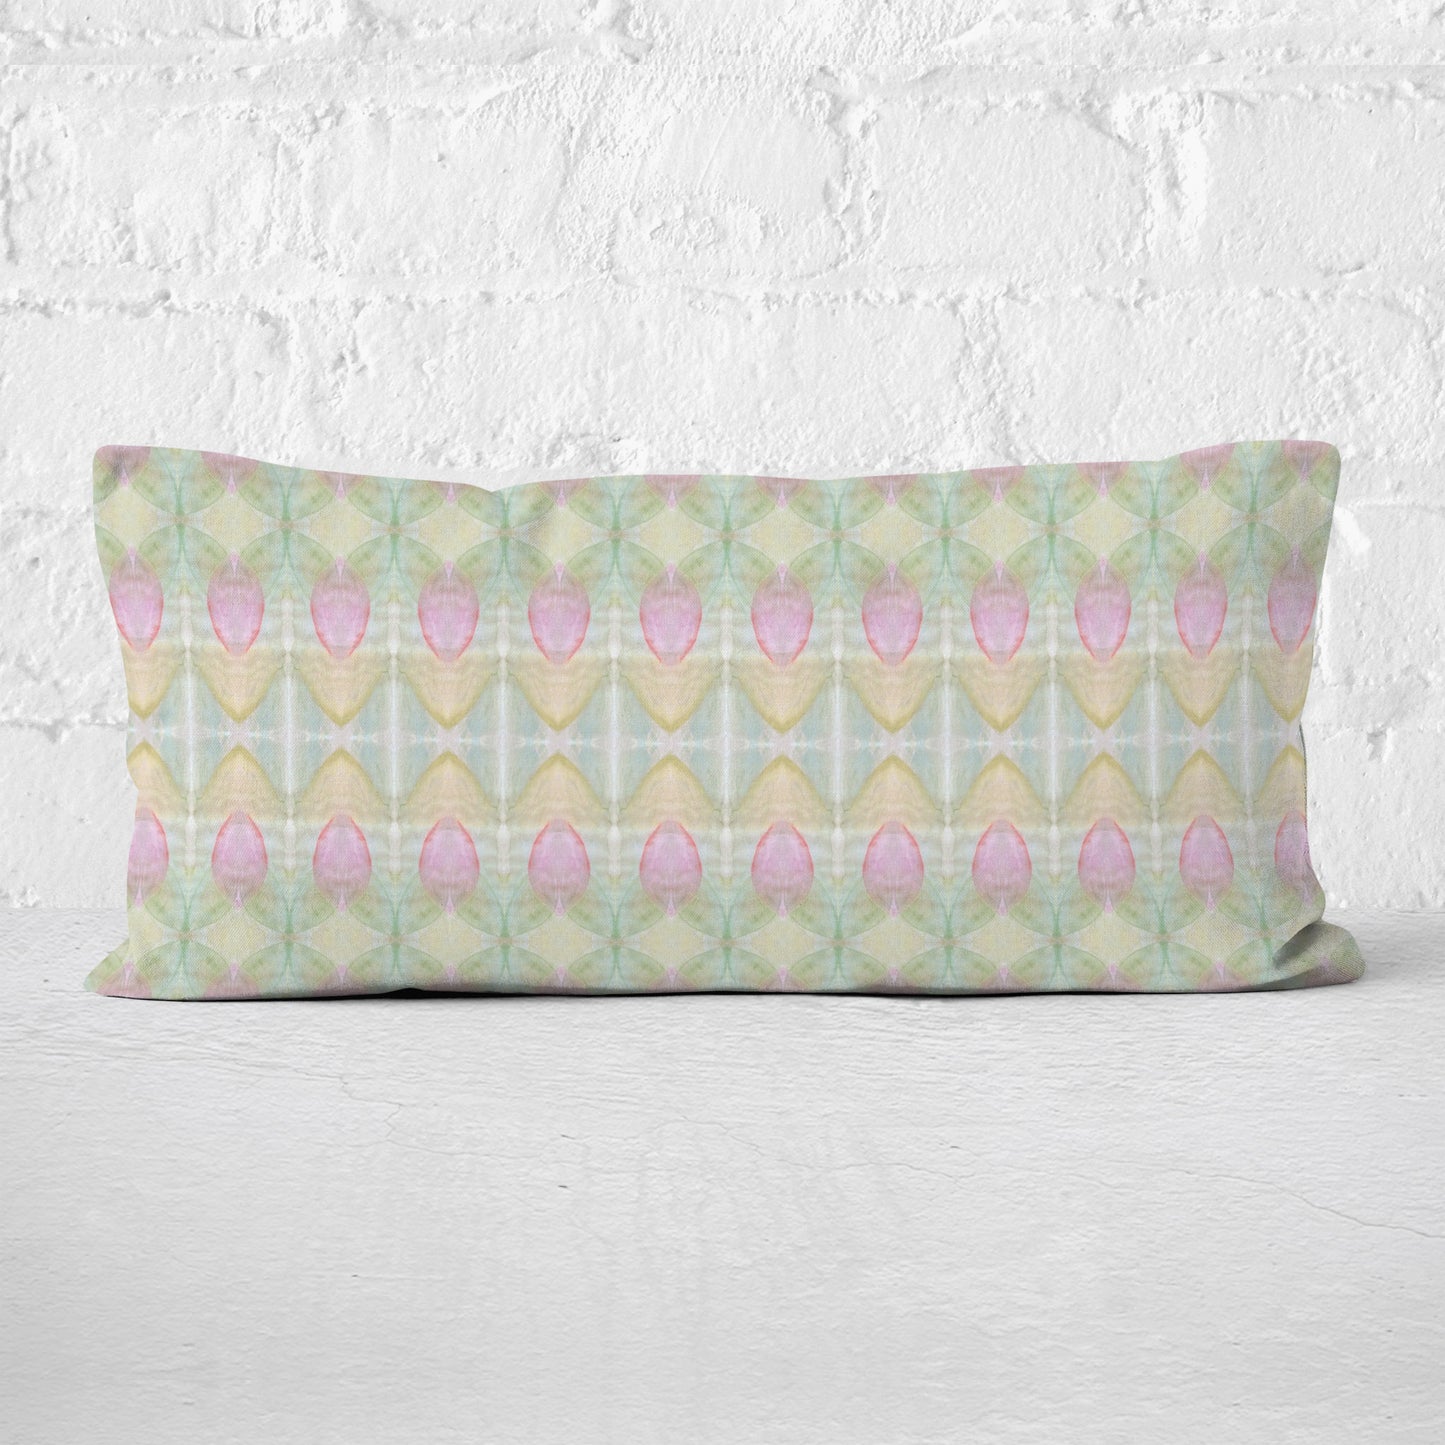 rectangular pillow featuring a hand-painted abstract rosebud pattern.